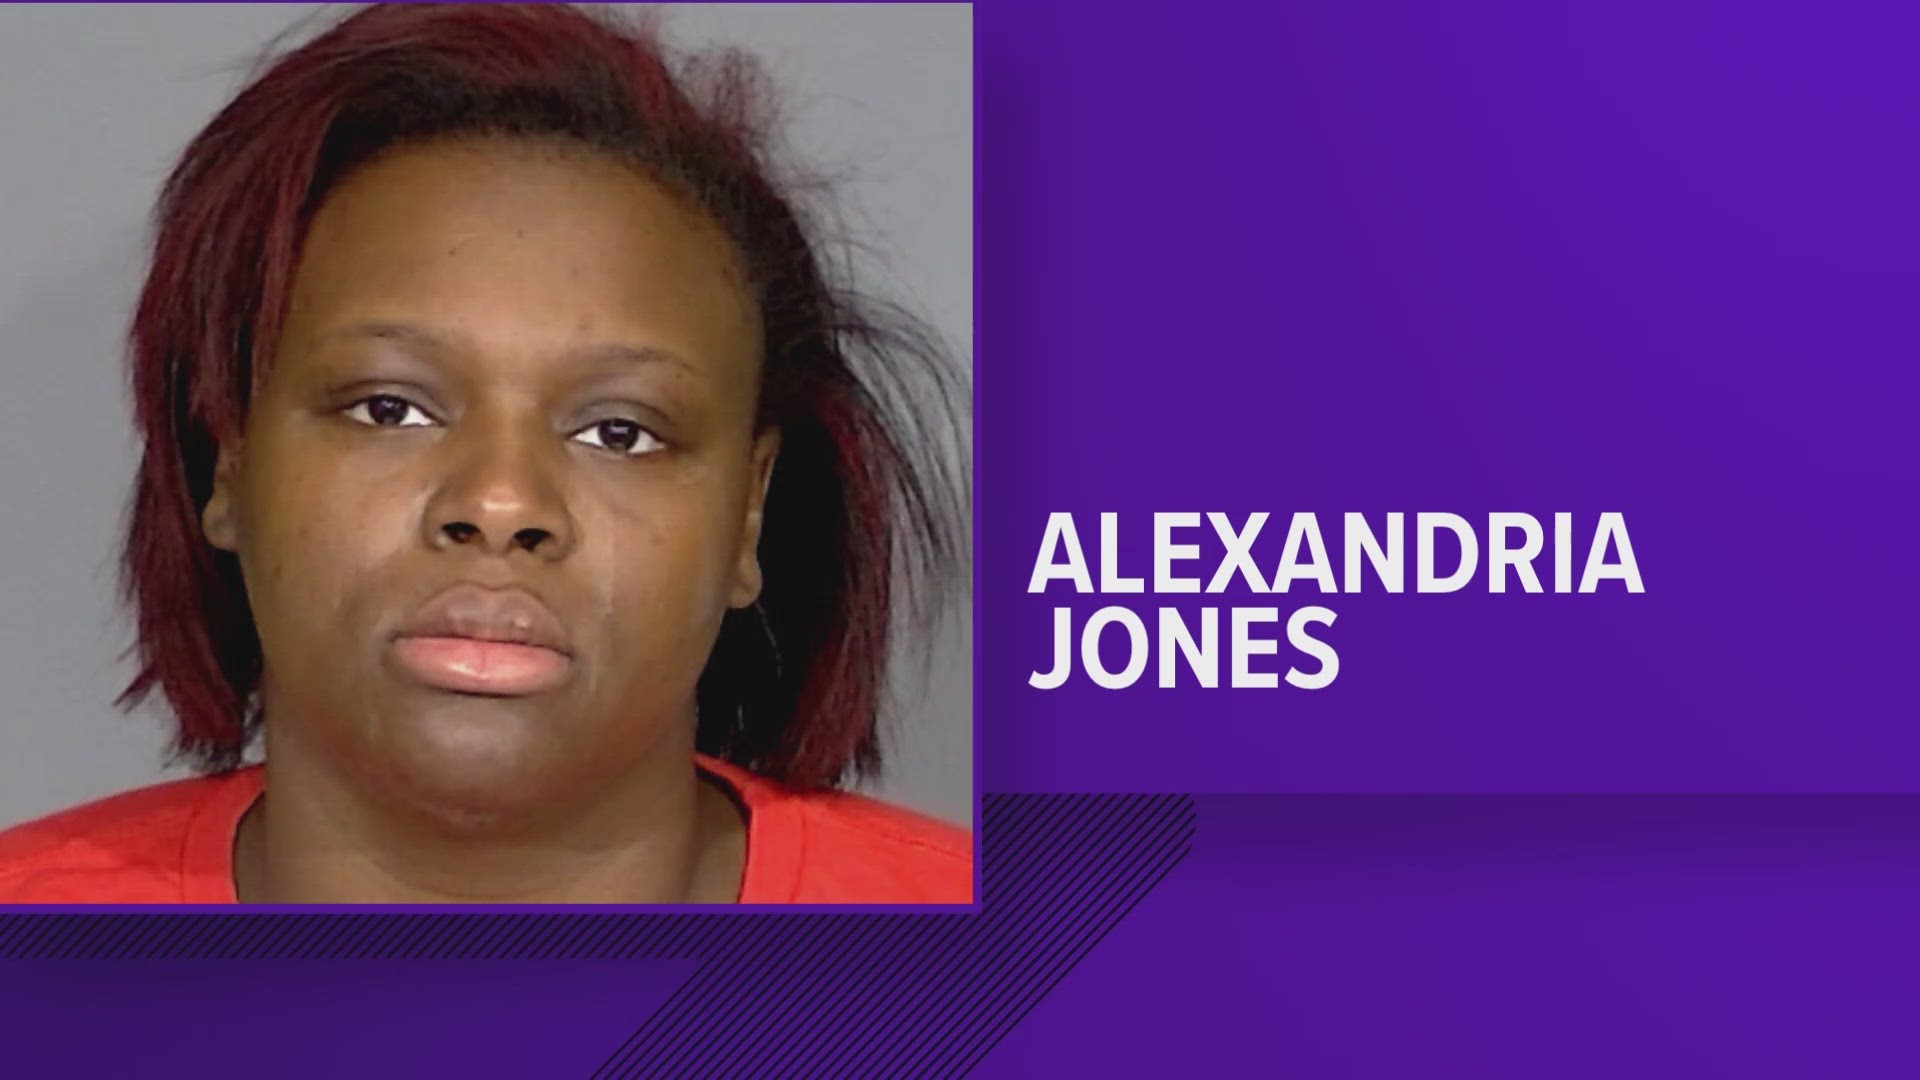 The baby's mother Alexandria Jones made her first appearance in court today.